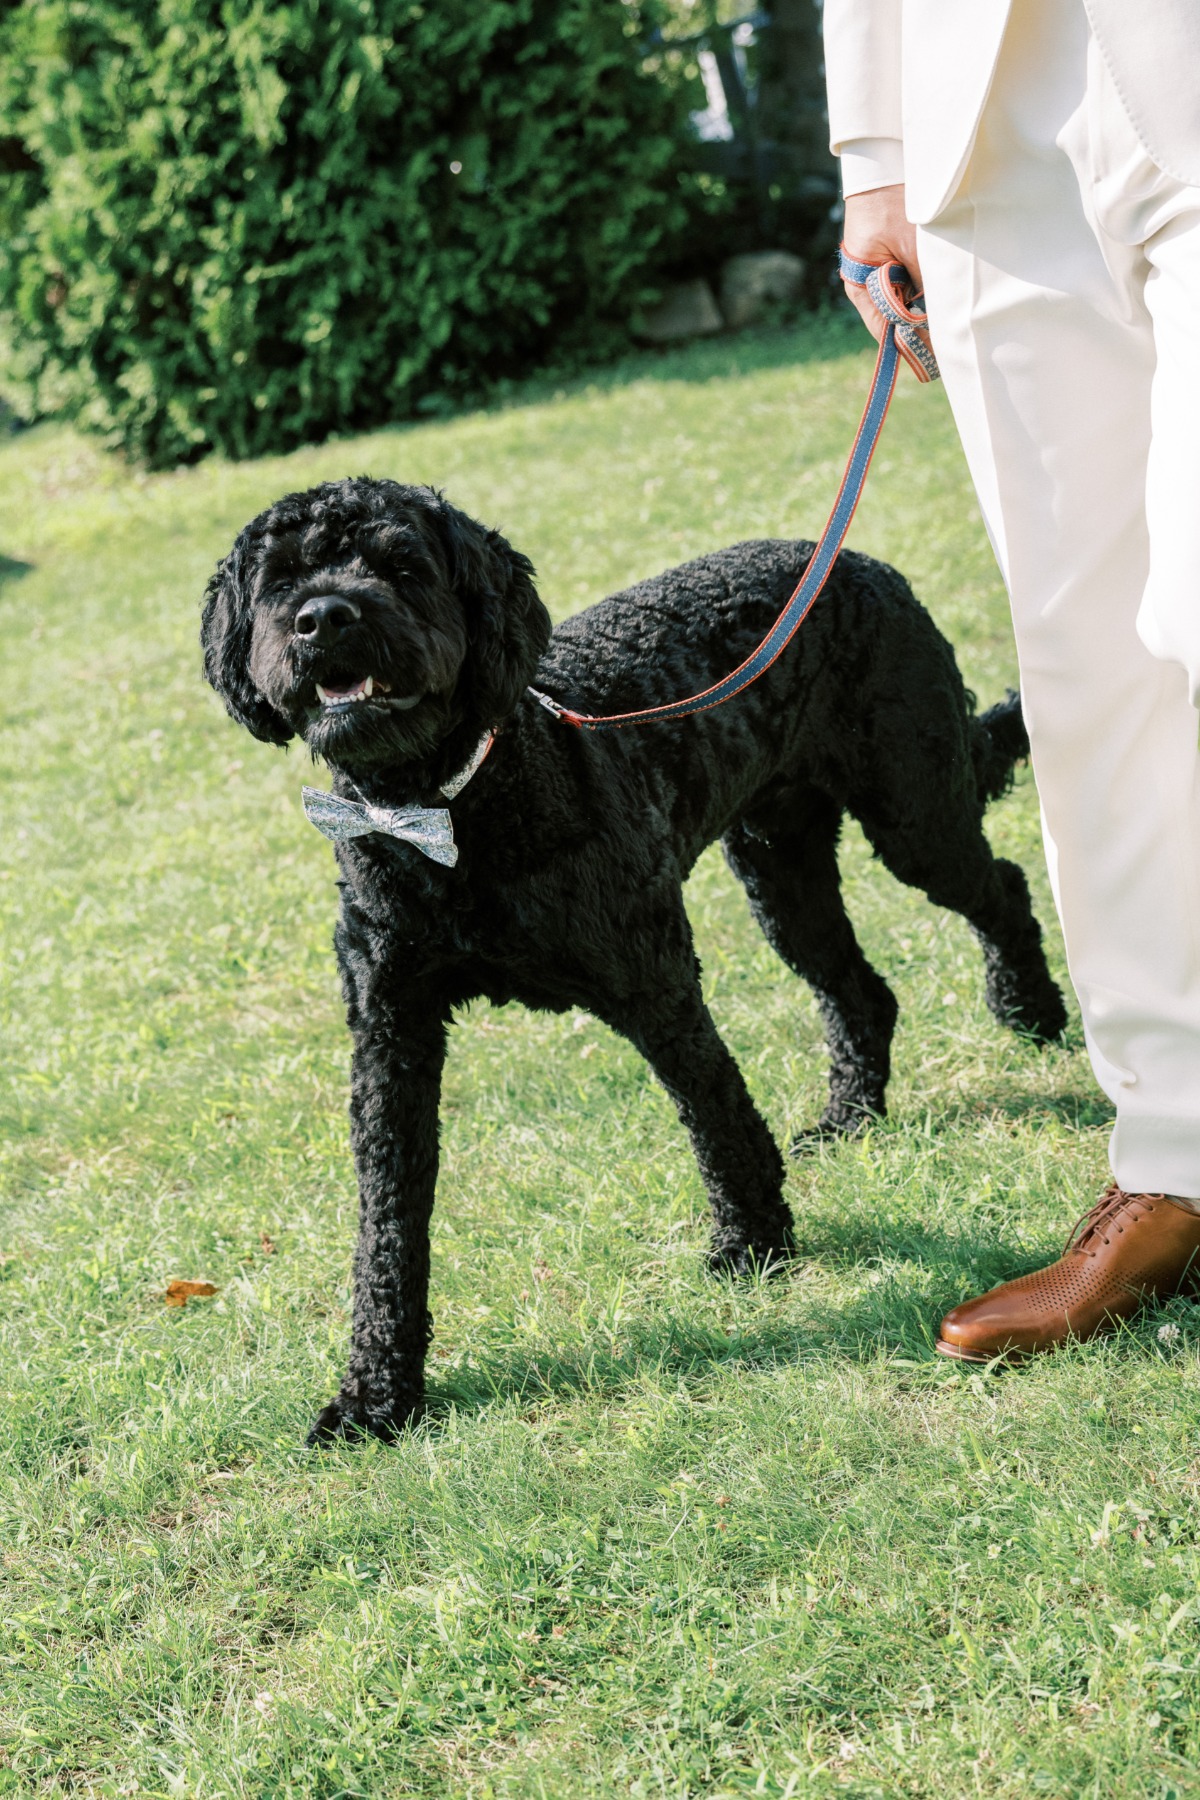 Adorable wedding dog in bow tie walking the groom down aisle 